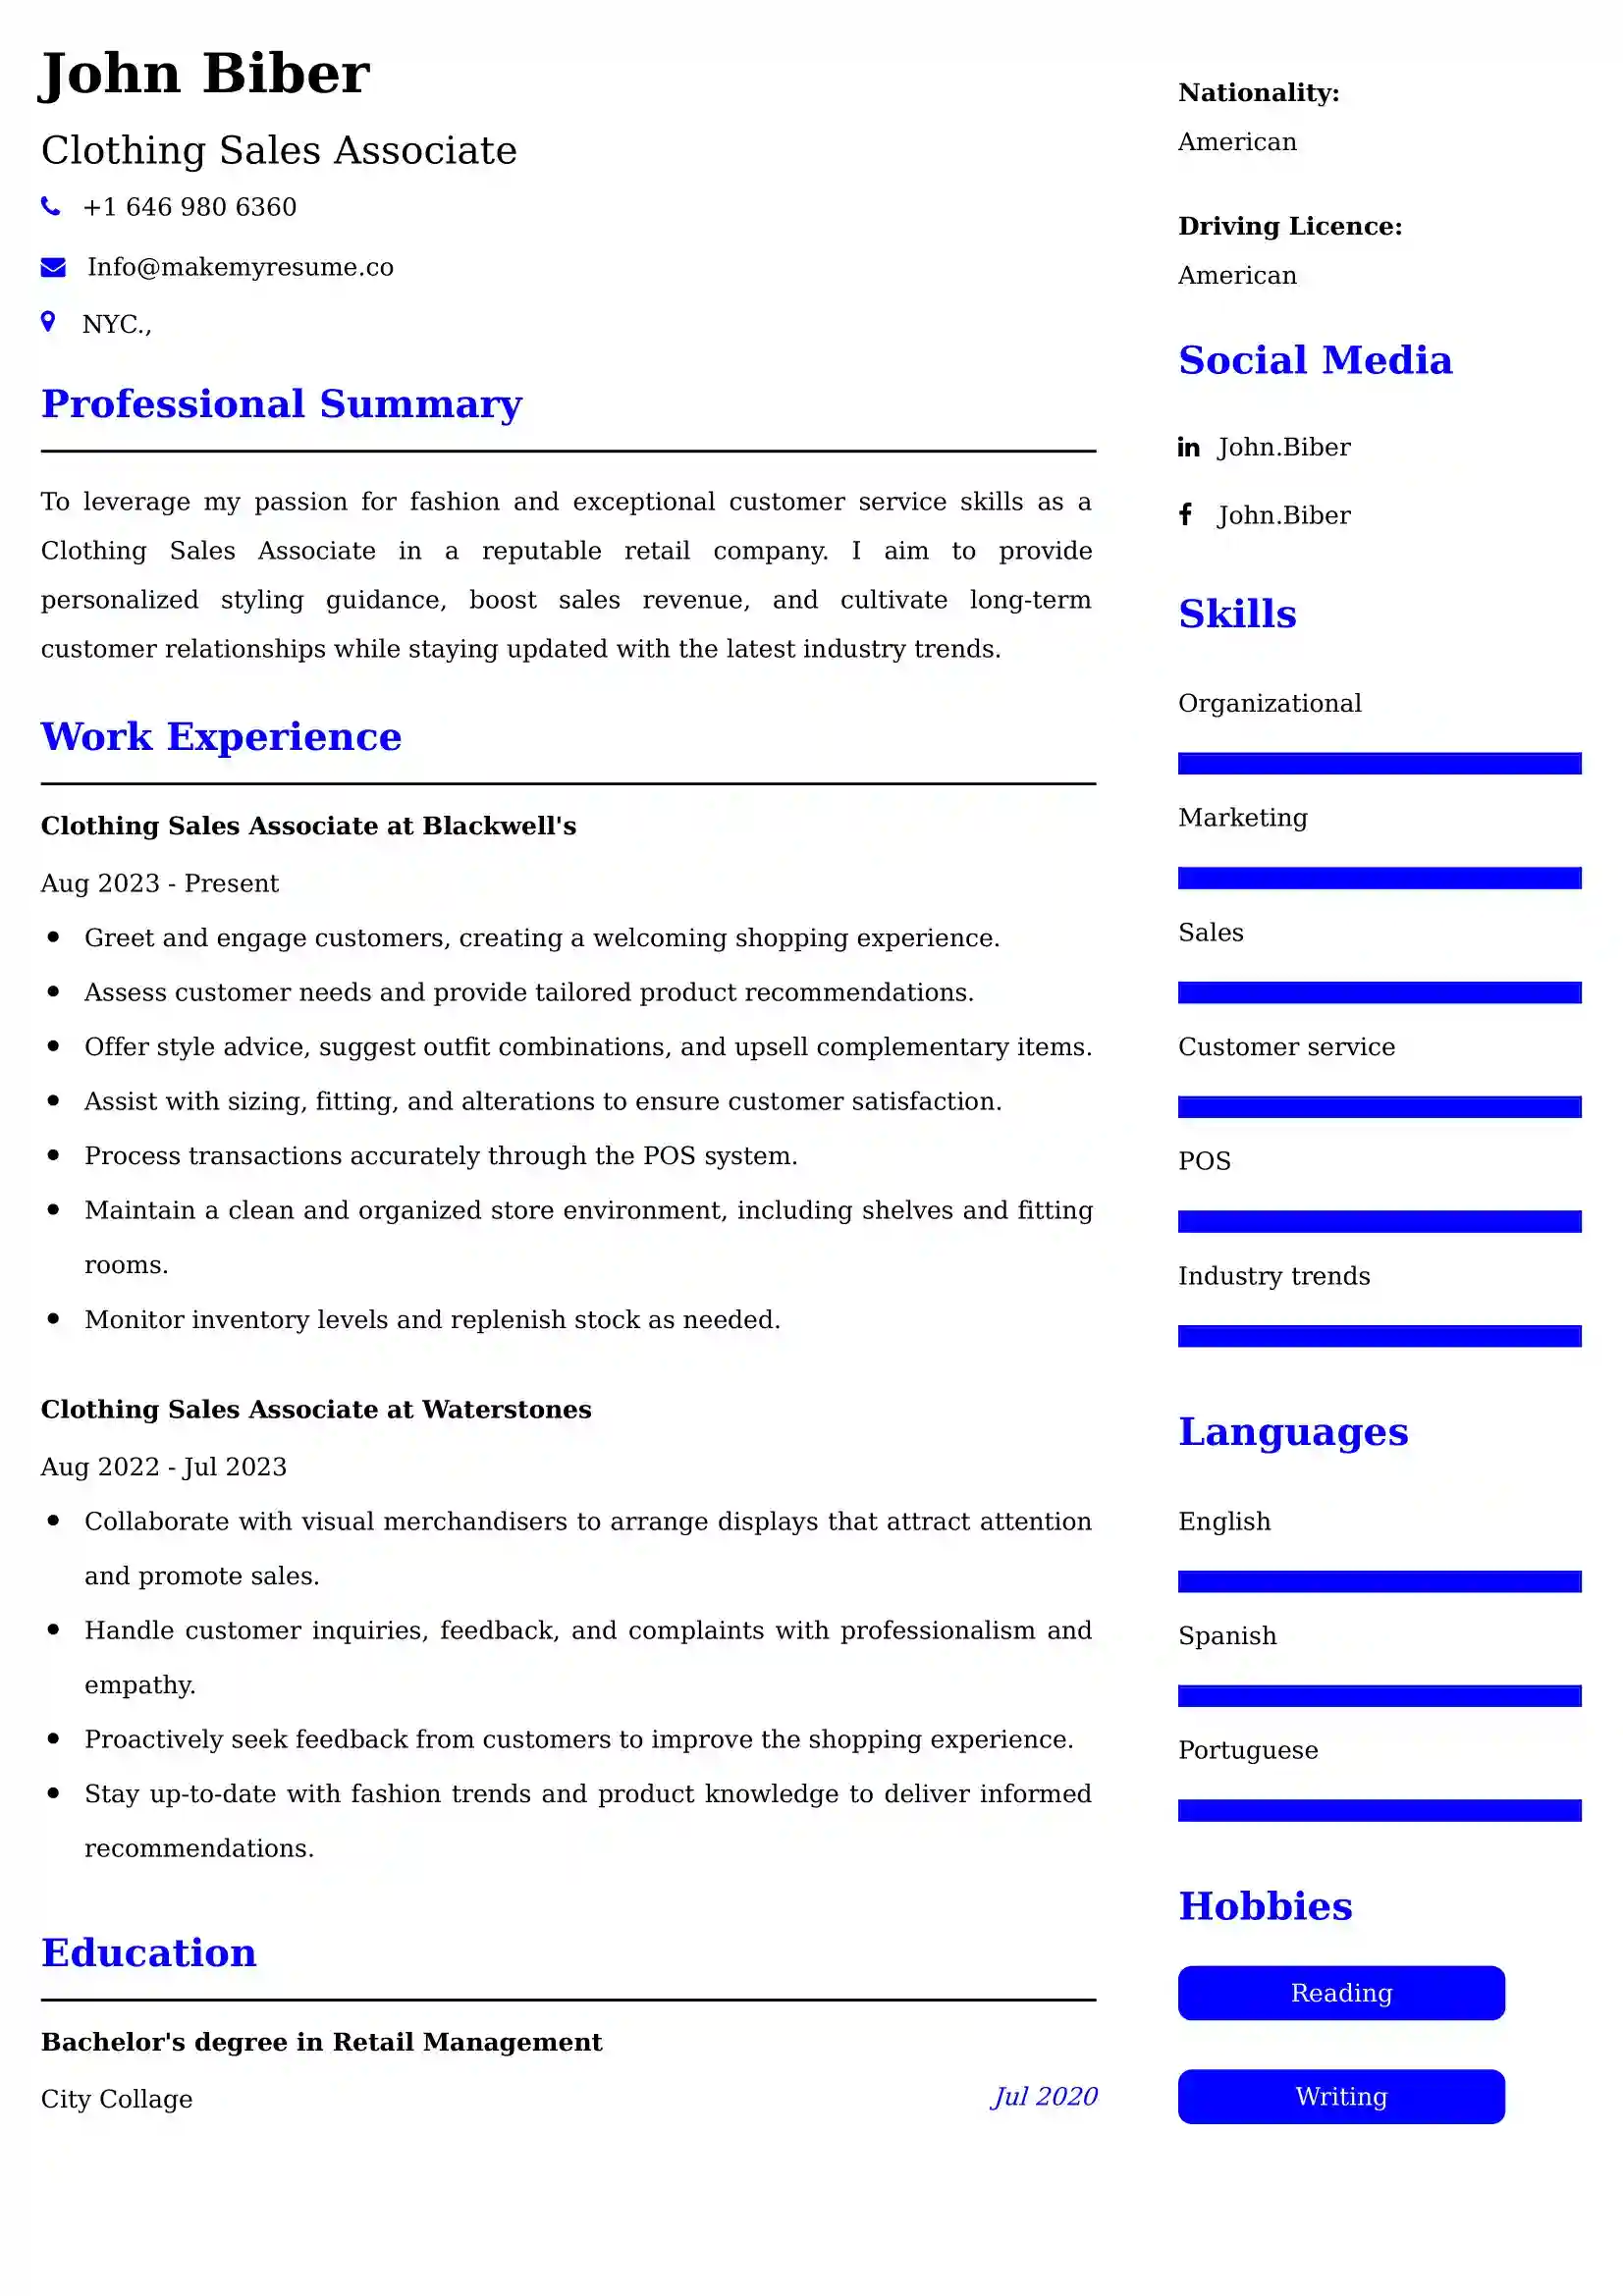 Clothing Sales Associate Resume Examples - Australian Format and Tips